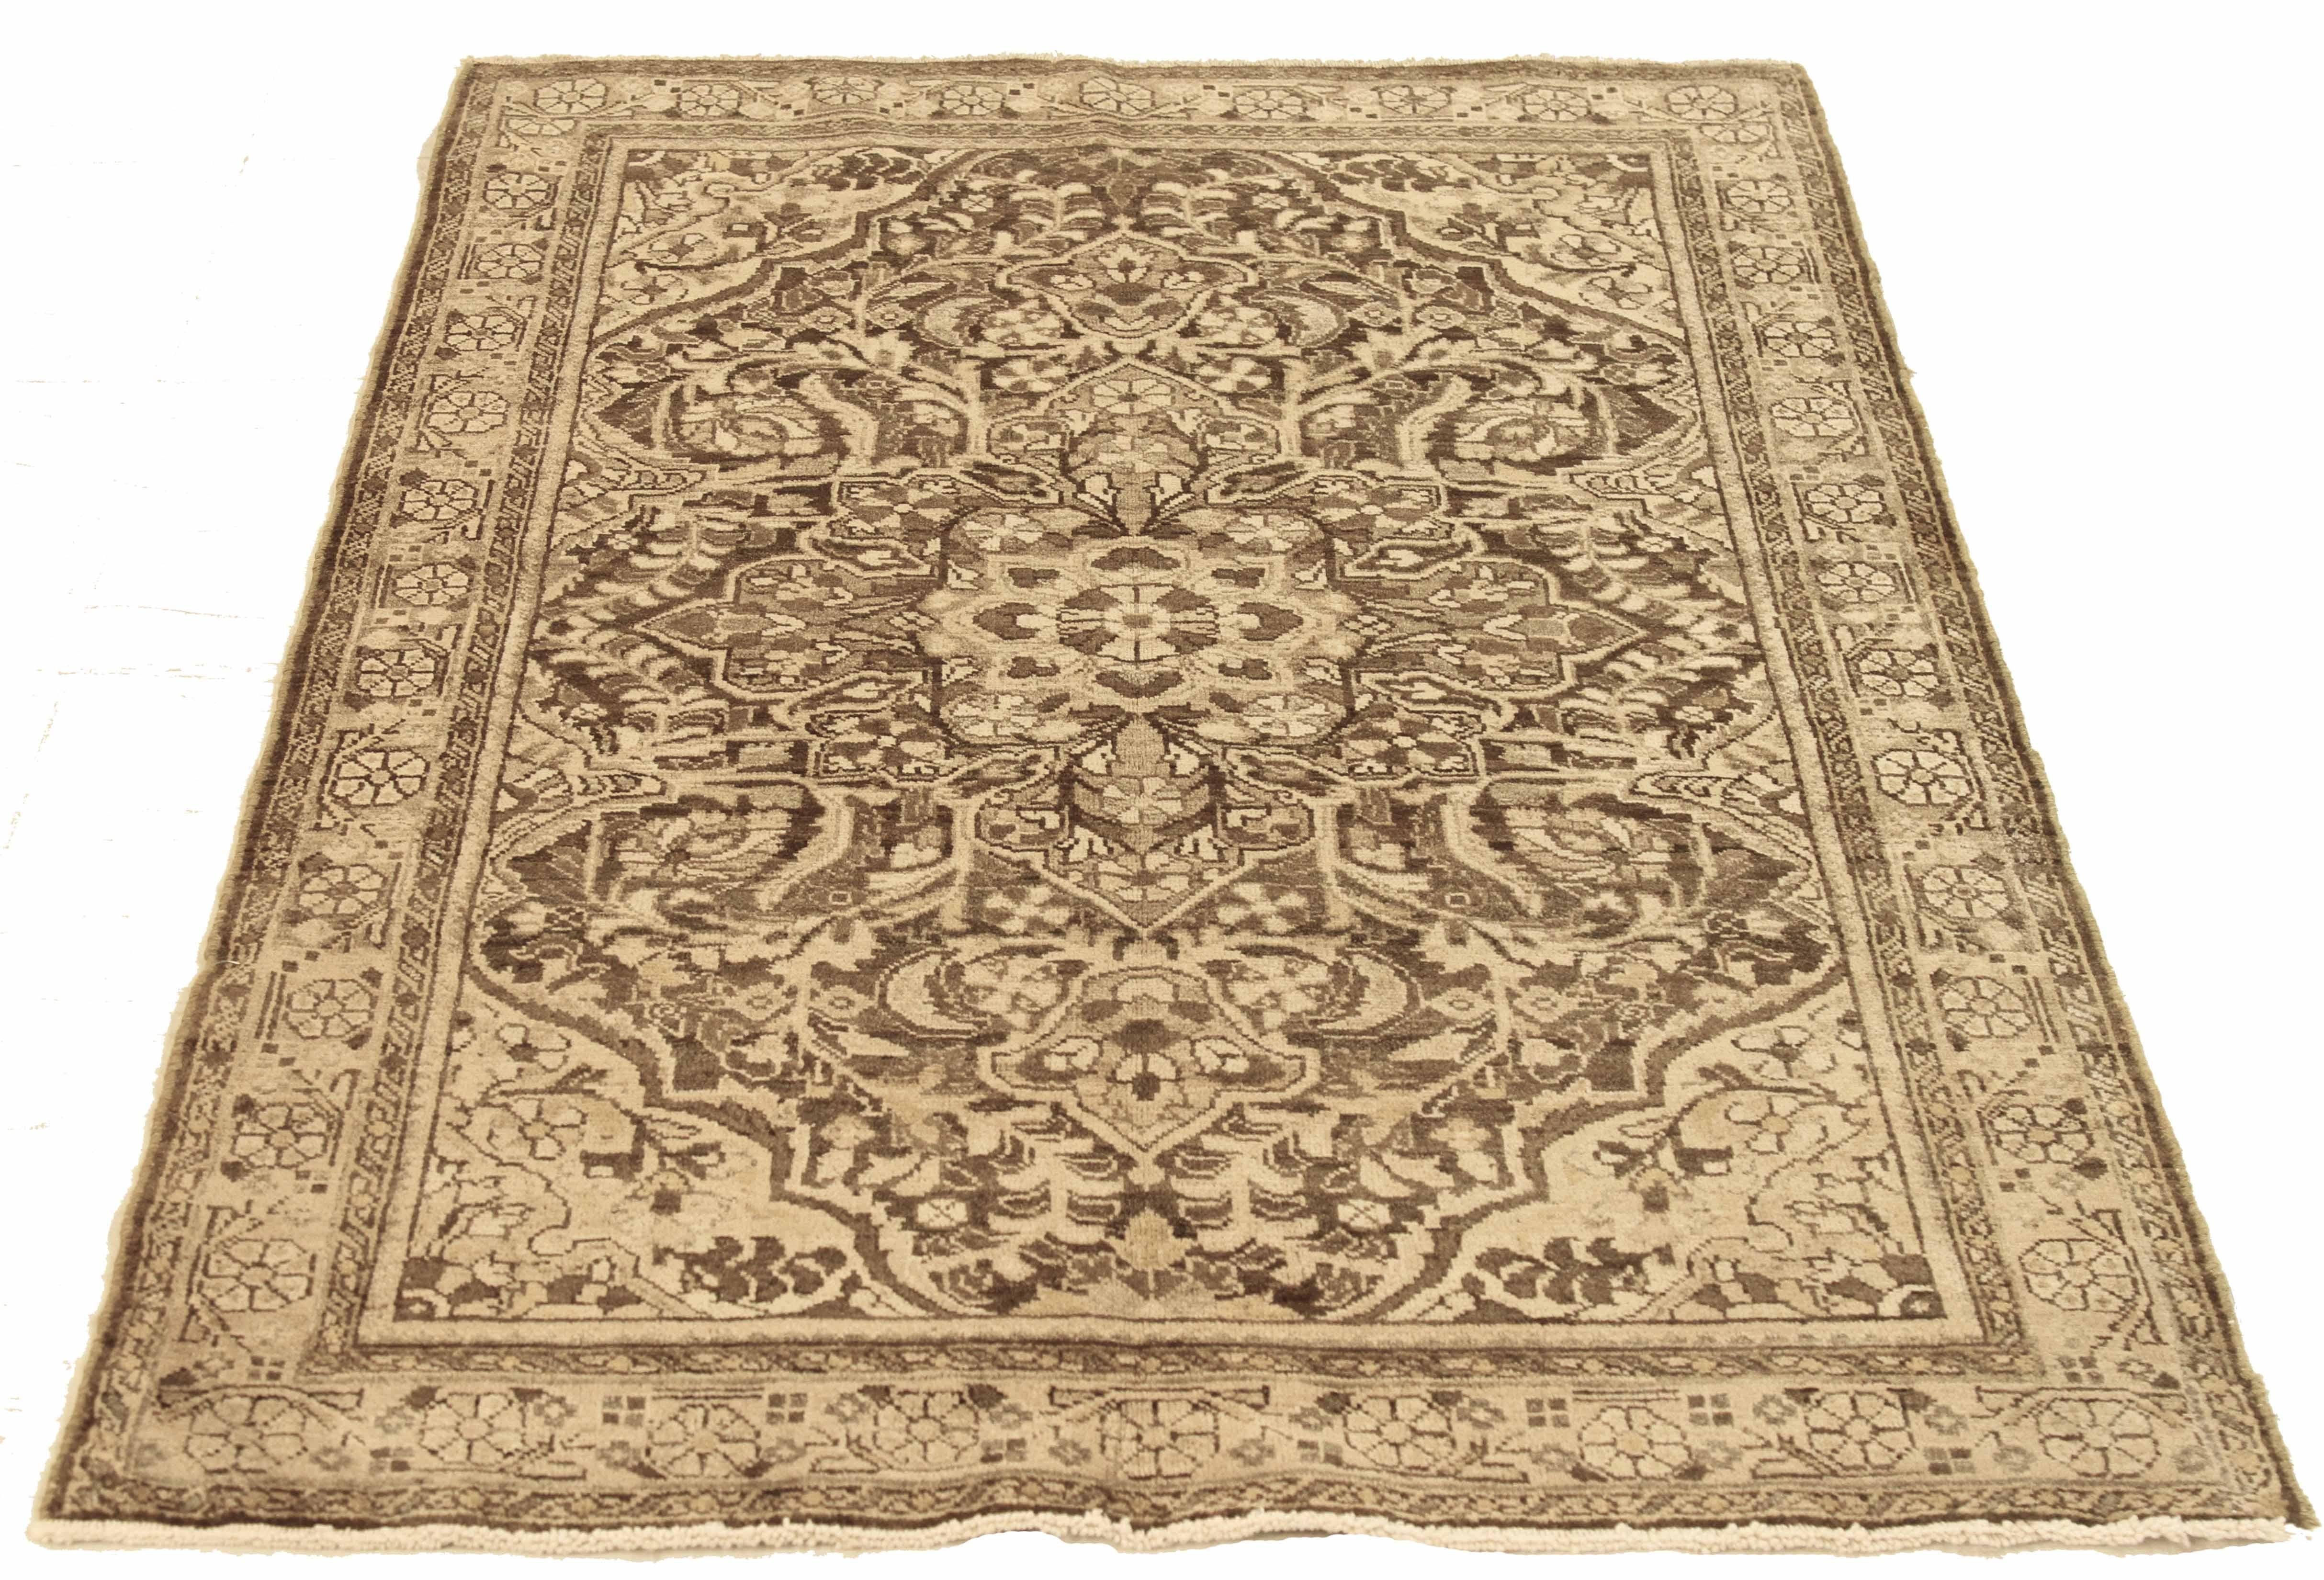 Antique Persian Area Rug - Handwoven with Premium Sheep's Wool & Natural Vegetable Dyes

This exquisite rug is handcrafted using the finest sheep's wool and colored with all-natural, safe-for-humans-and-pets vegetable dyes. It features a traditional